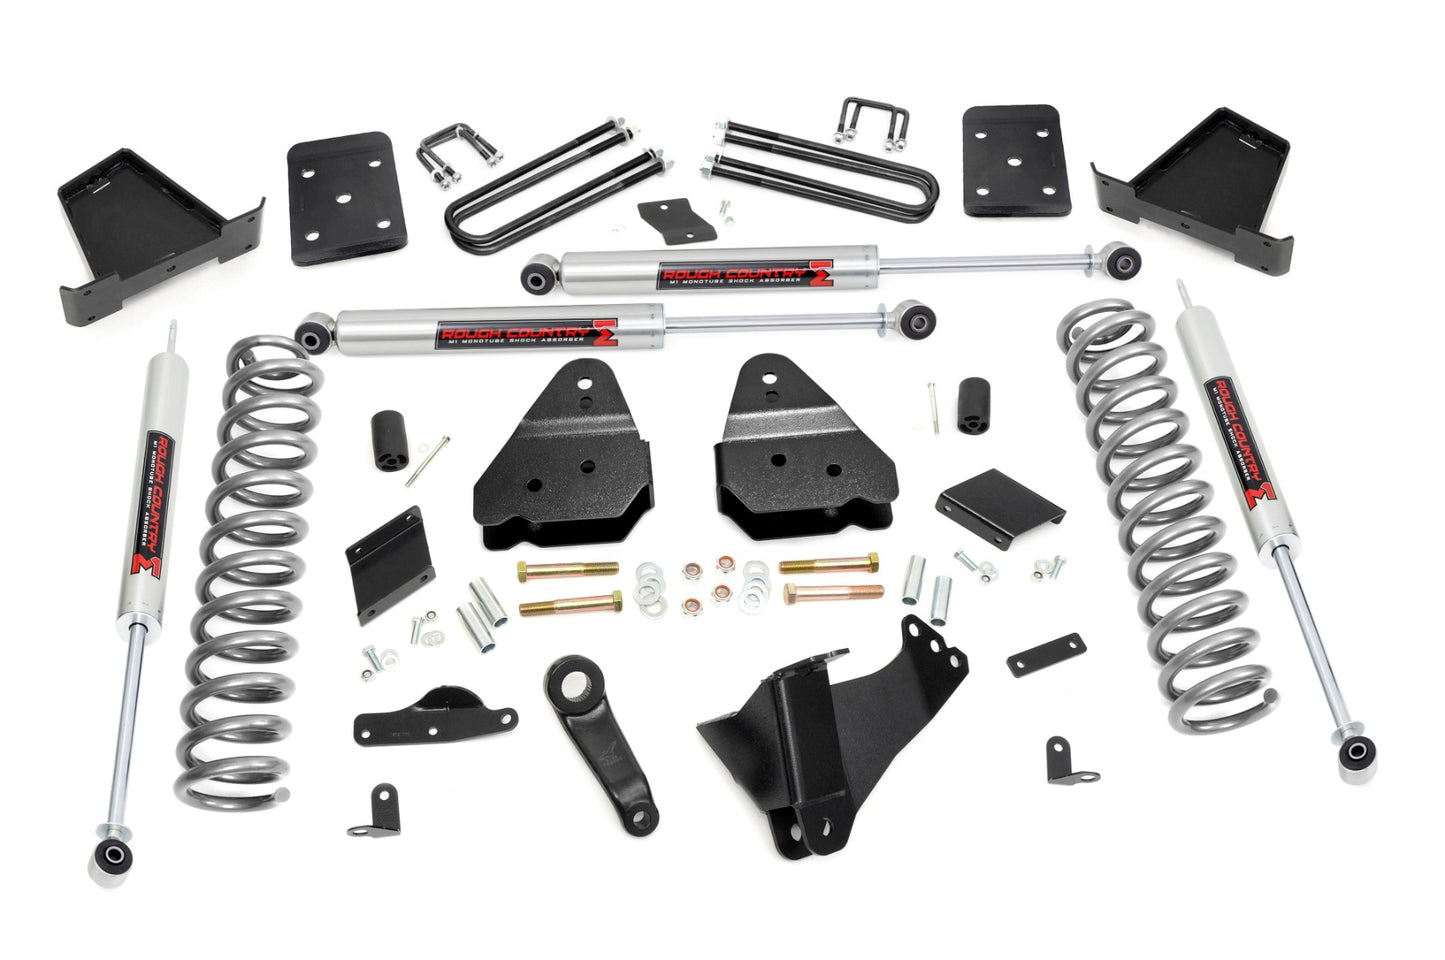 6 Inch Lift Kit | Gas | No OVLD | M1 | Ford F-250 Super Duty (15-16)